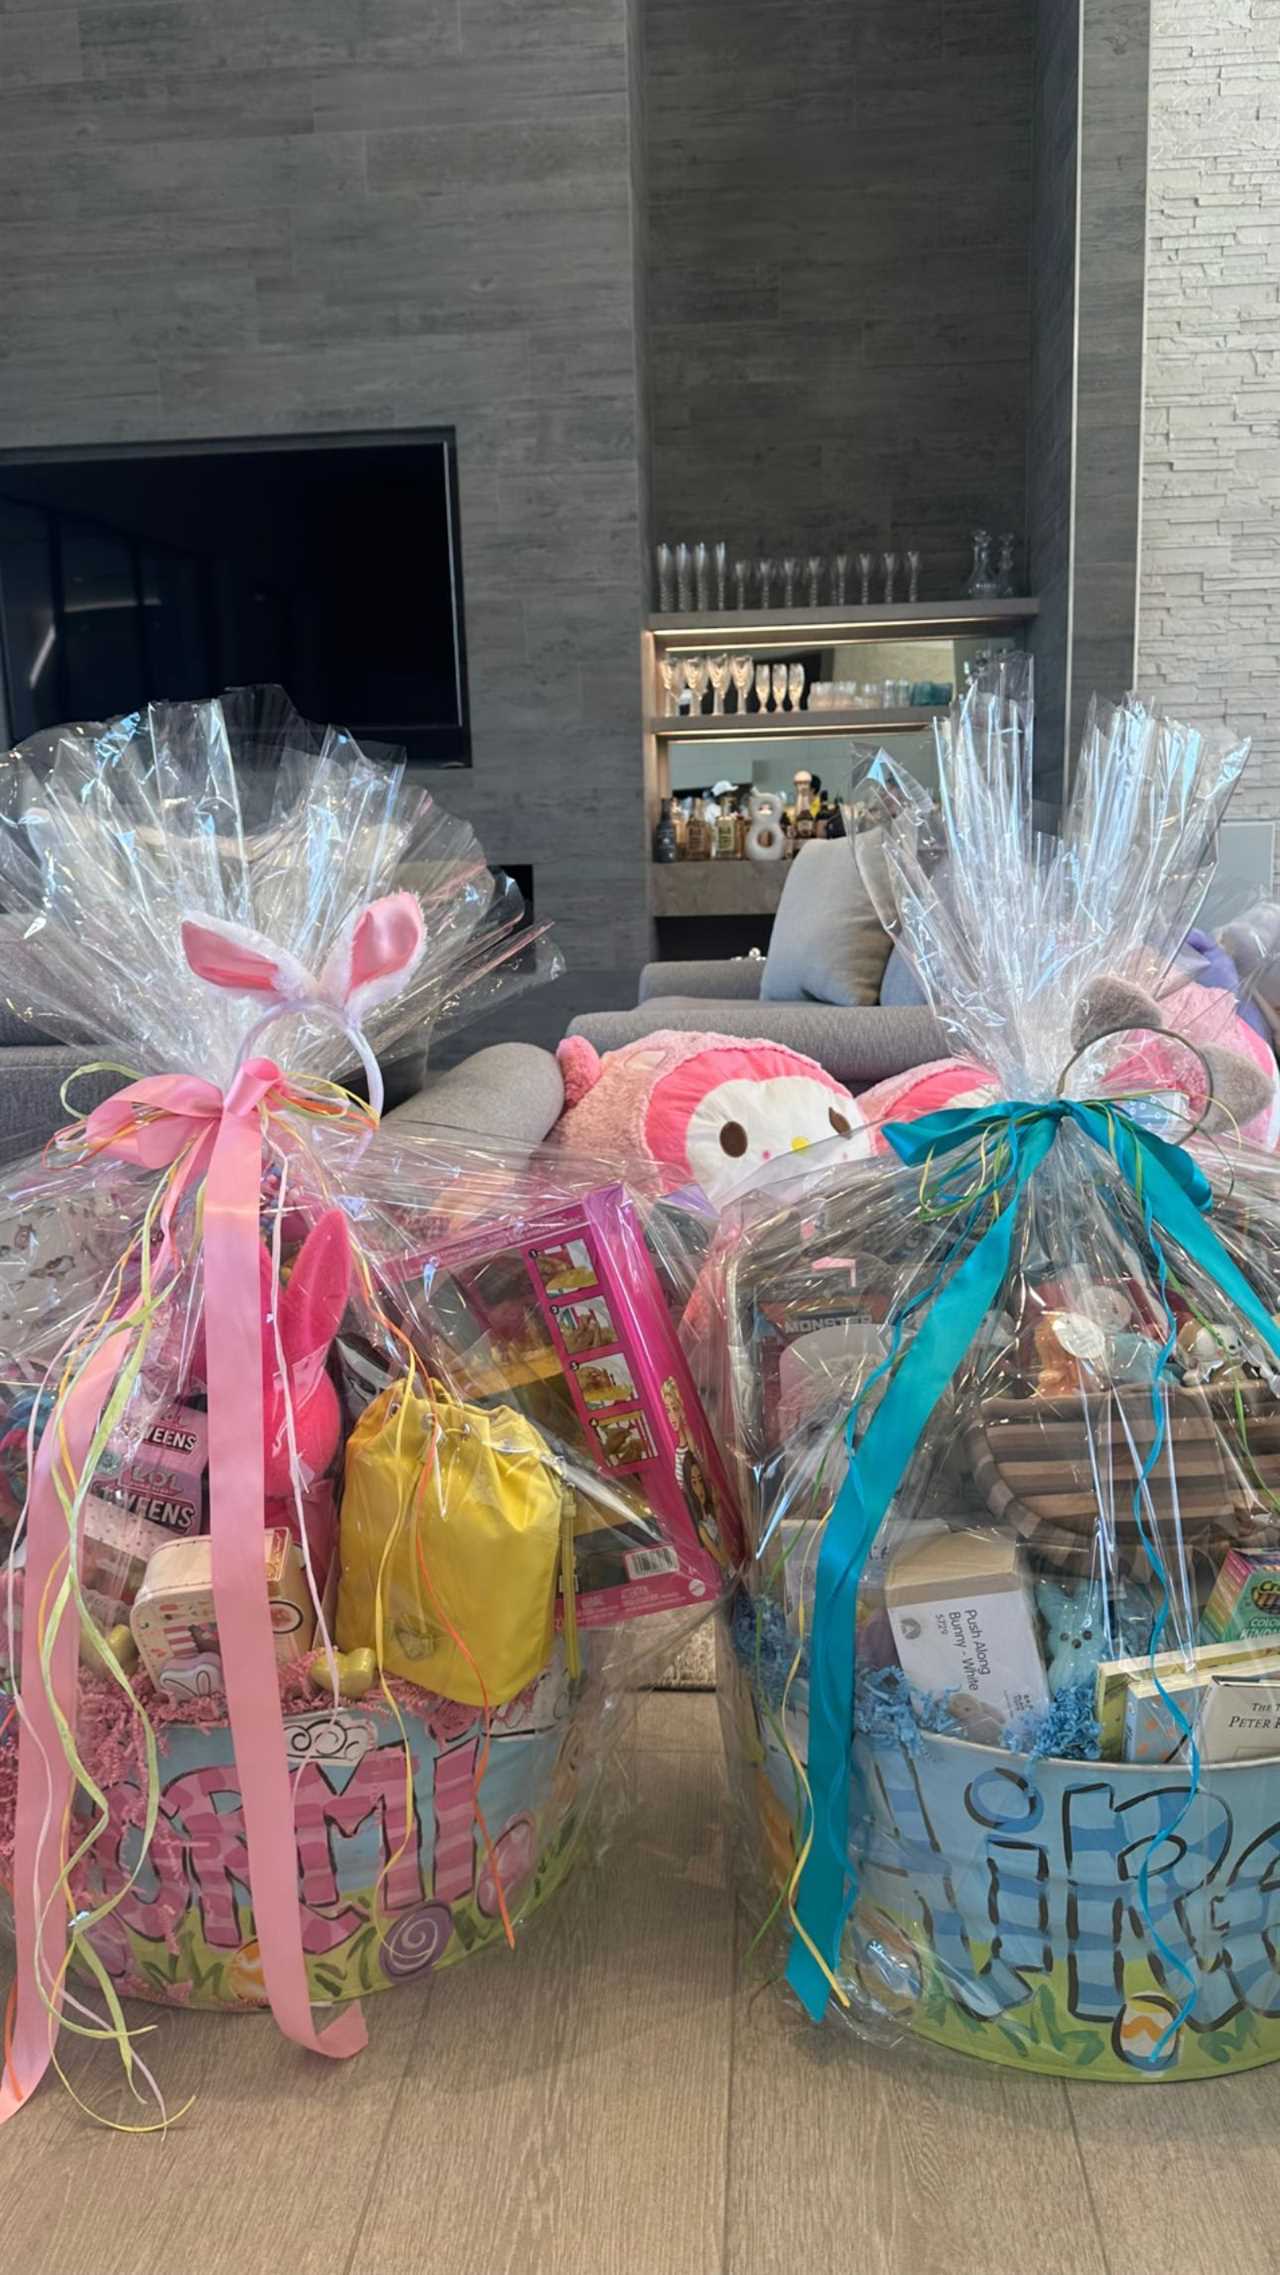 Kardashian fans slam family’s ‘sick need’ to ‘flaunt their wealth’ with another over-the-top and ‘wasteful’ Easter bash